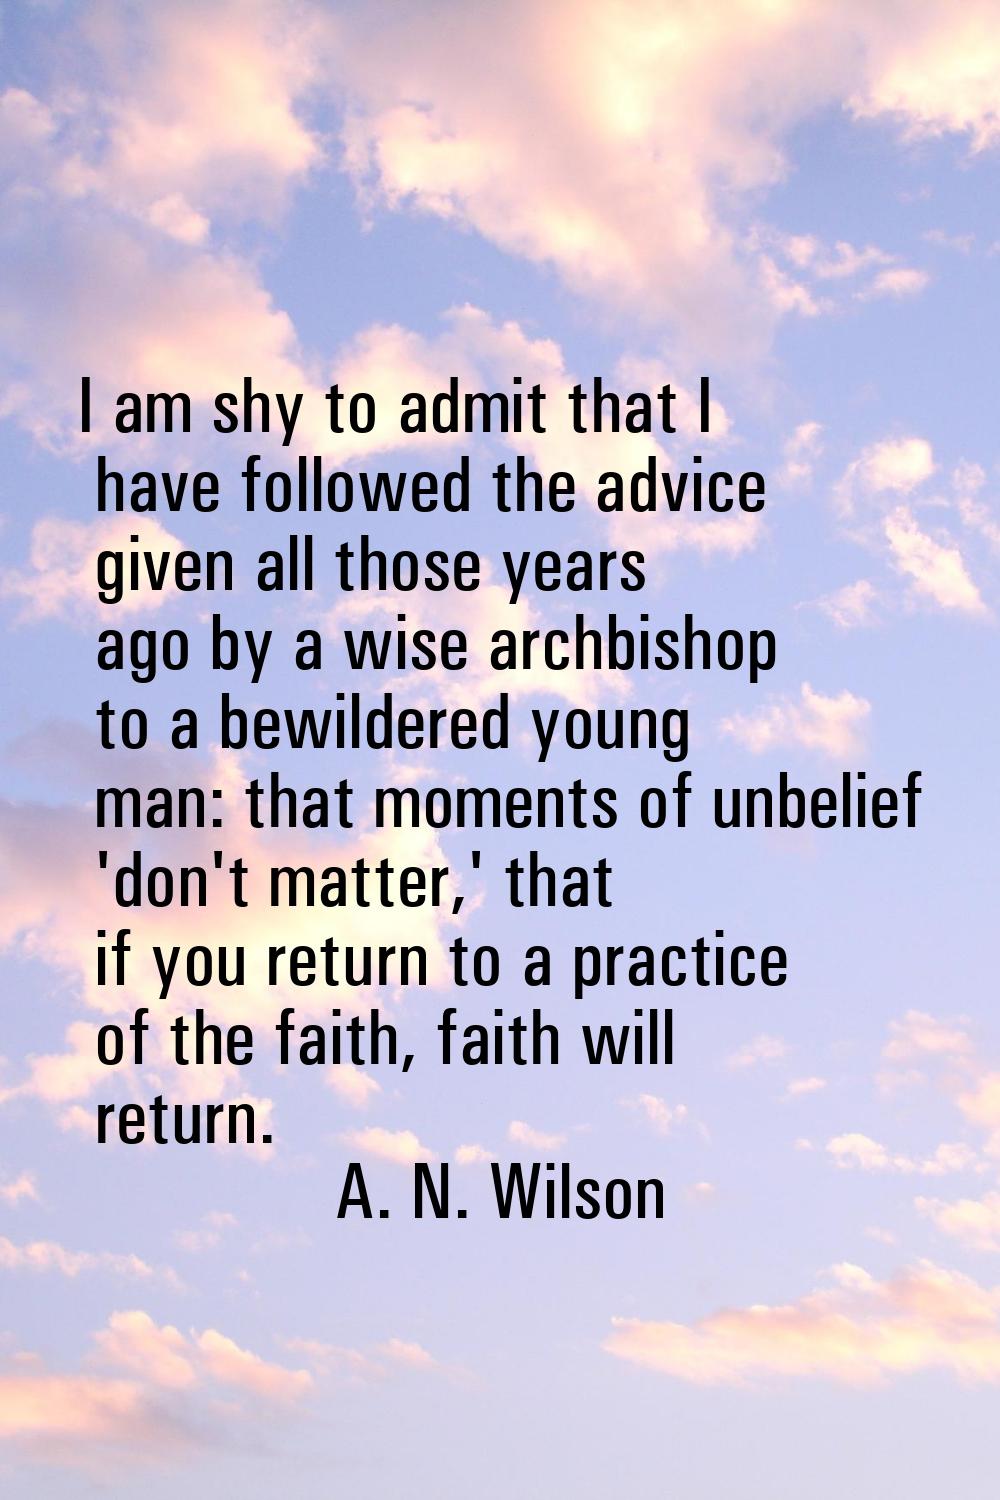 I am shy to admit that I have followed the advice given all those years ago by a wise archbishop to